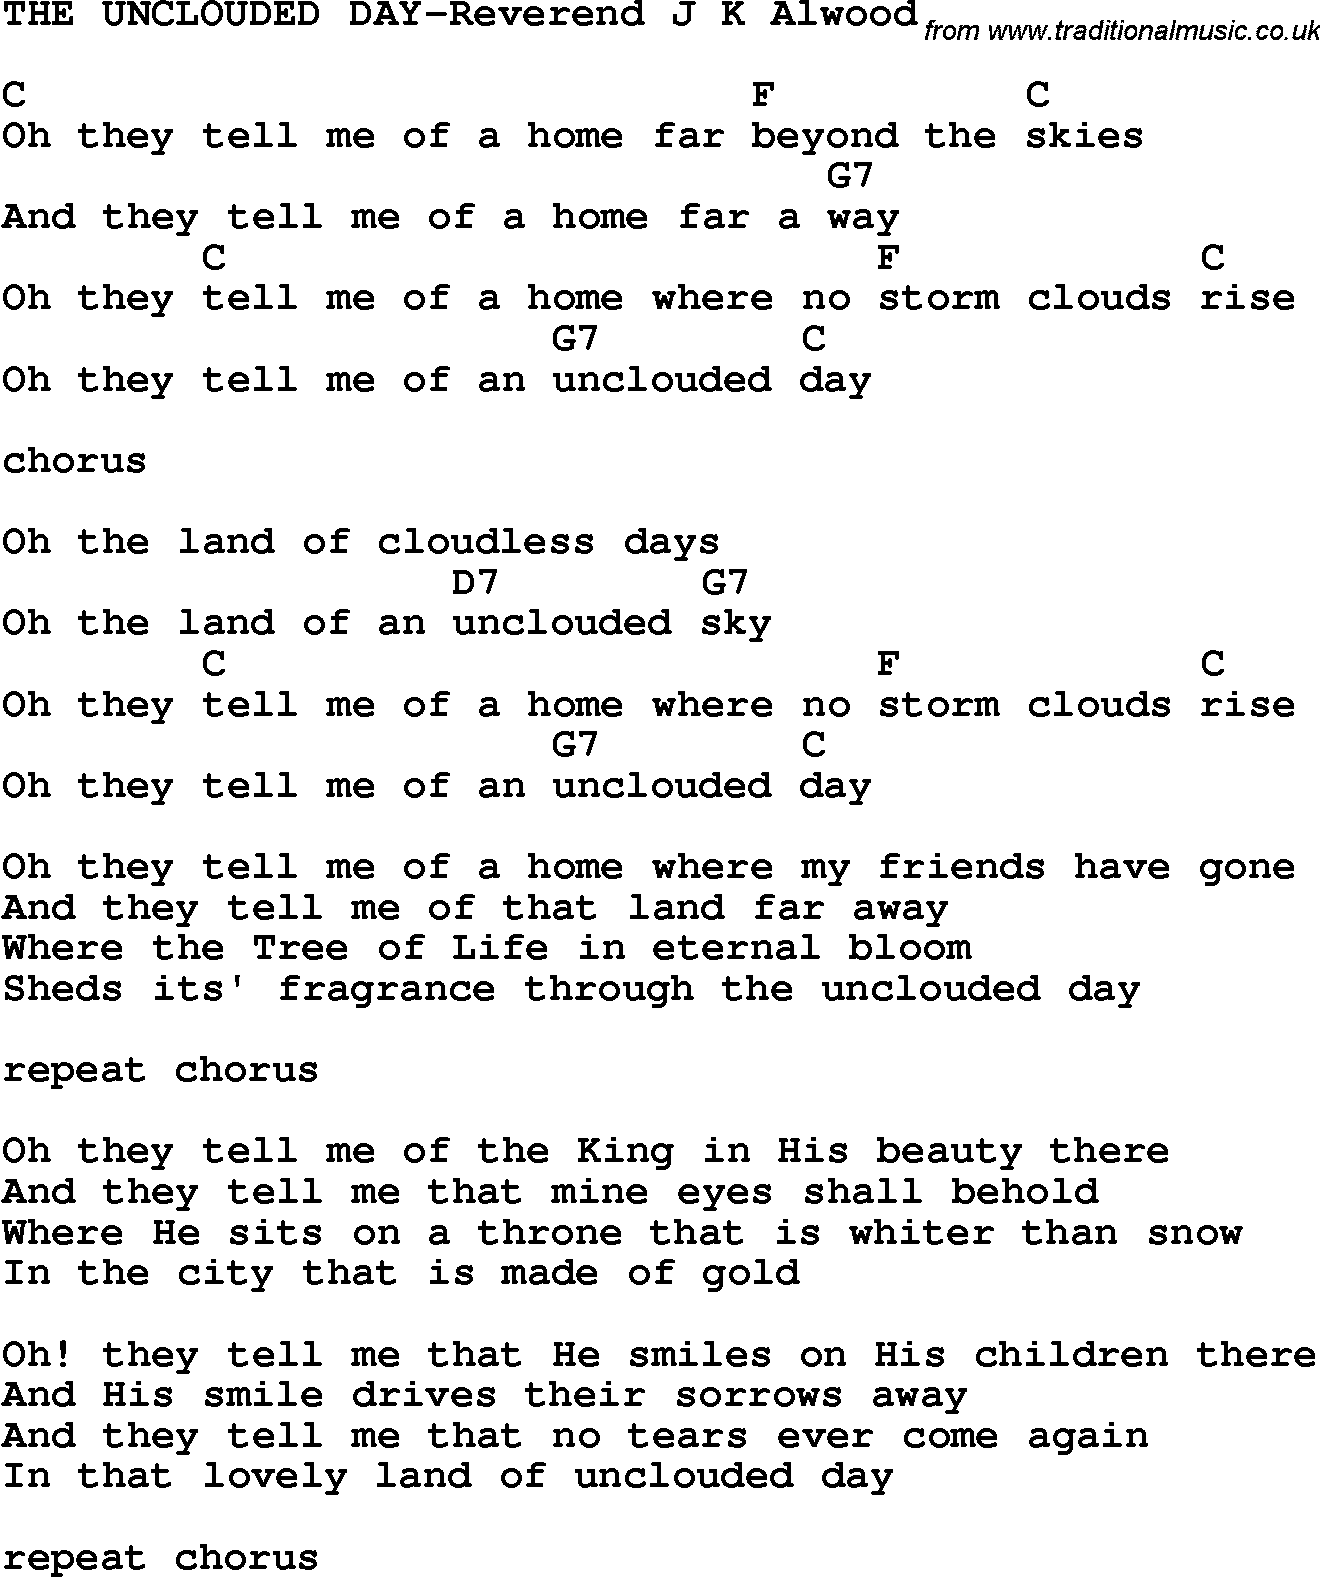 Country, Southern and Bluegrass Gospel Song THE UNCLOUDED DAY-Reverend J K Alwood lyrics and chords